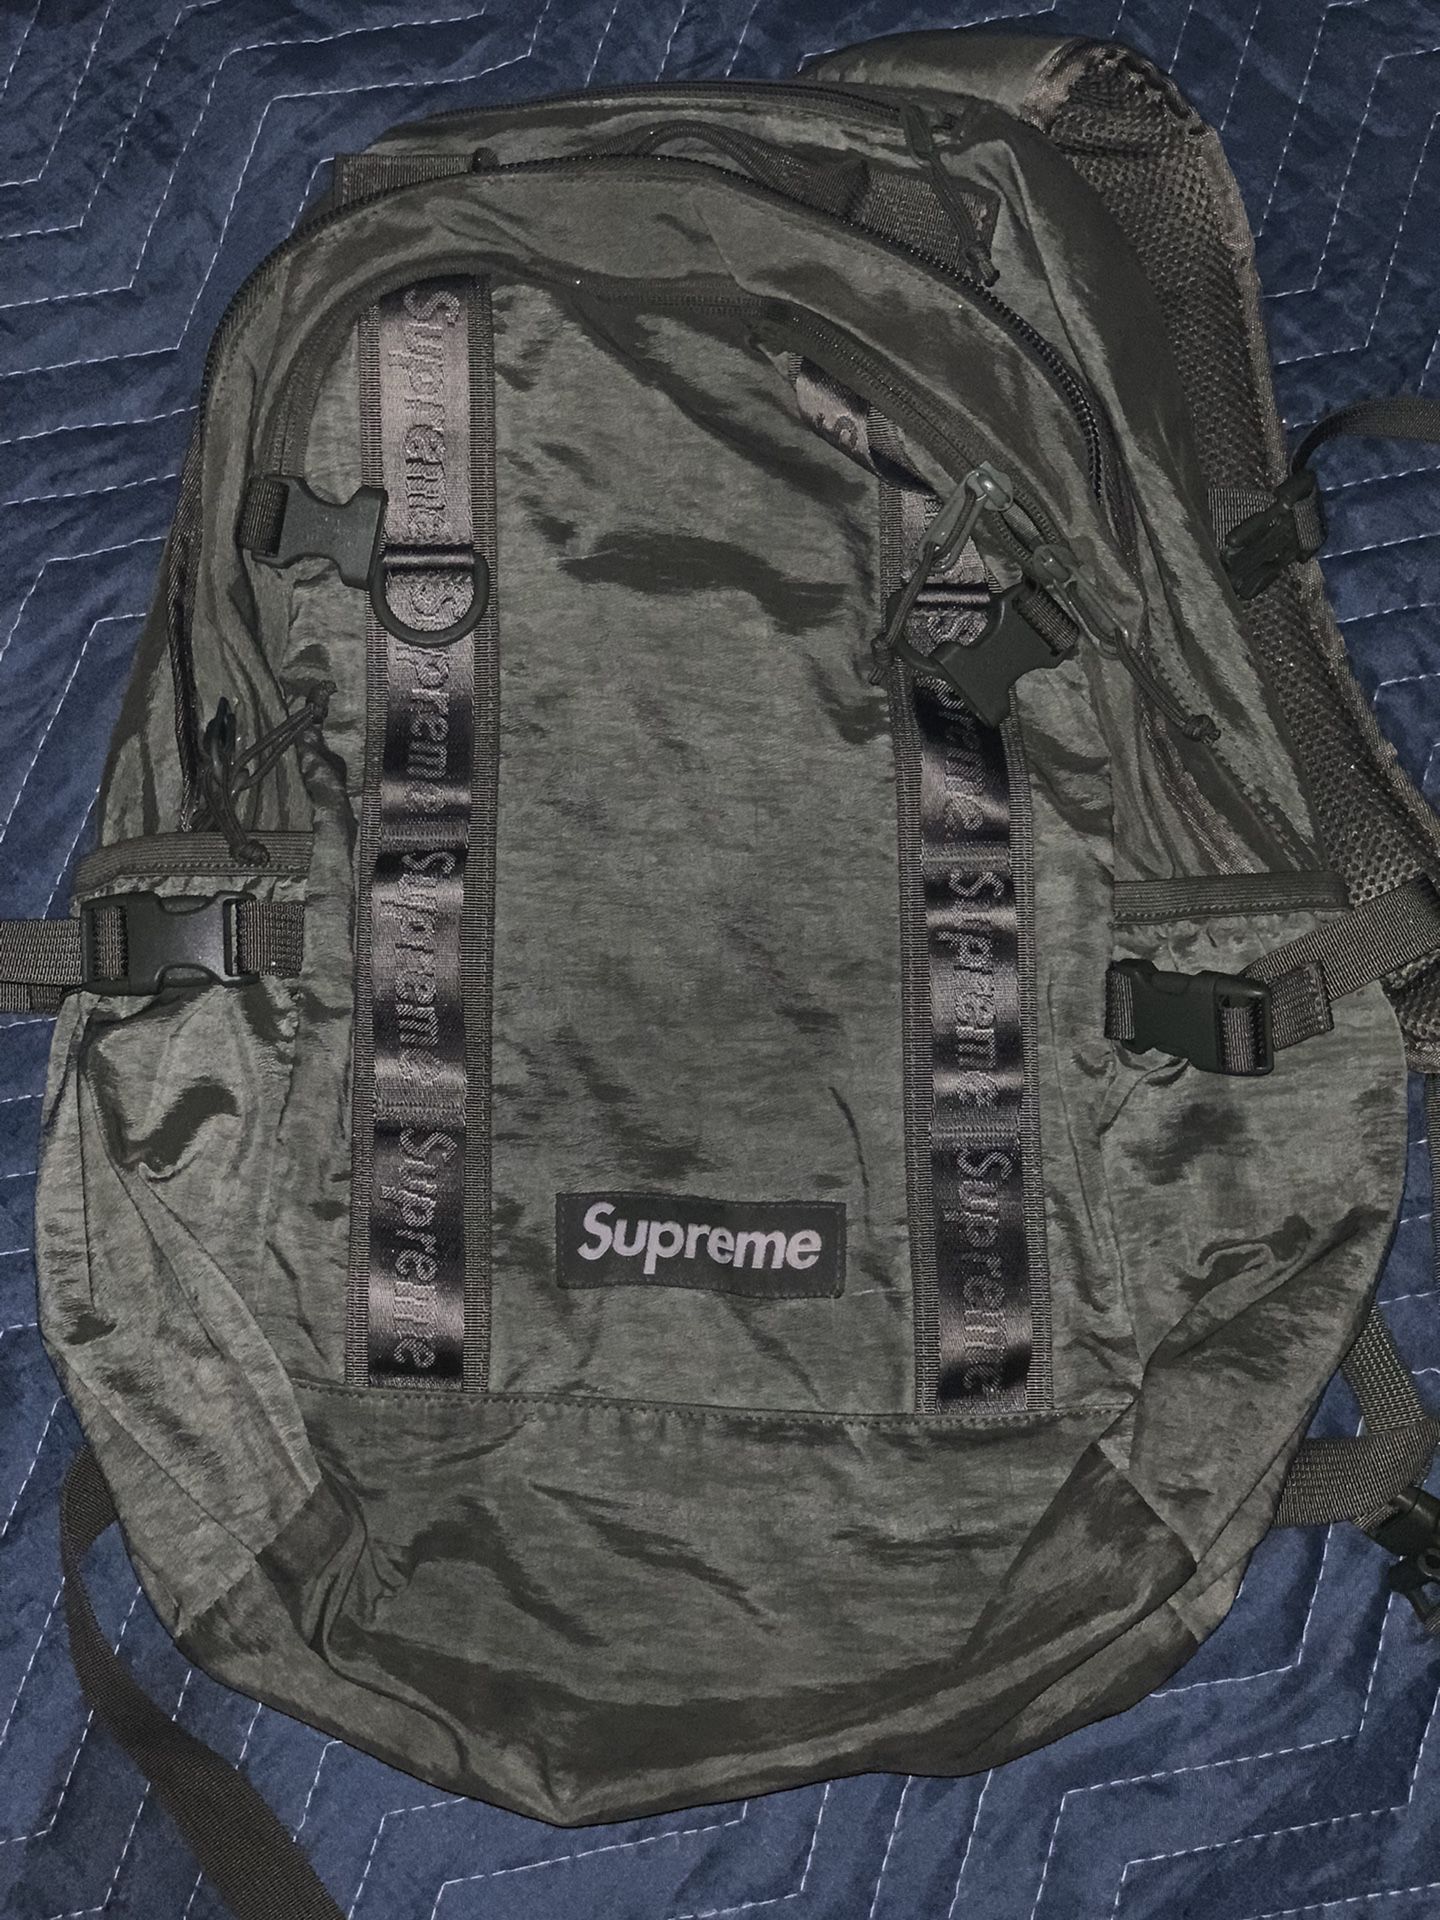 Supreme Backpack (FW20) for Sale in Whittier, CA - OfferUp